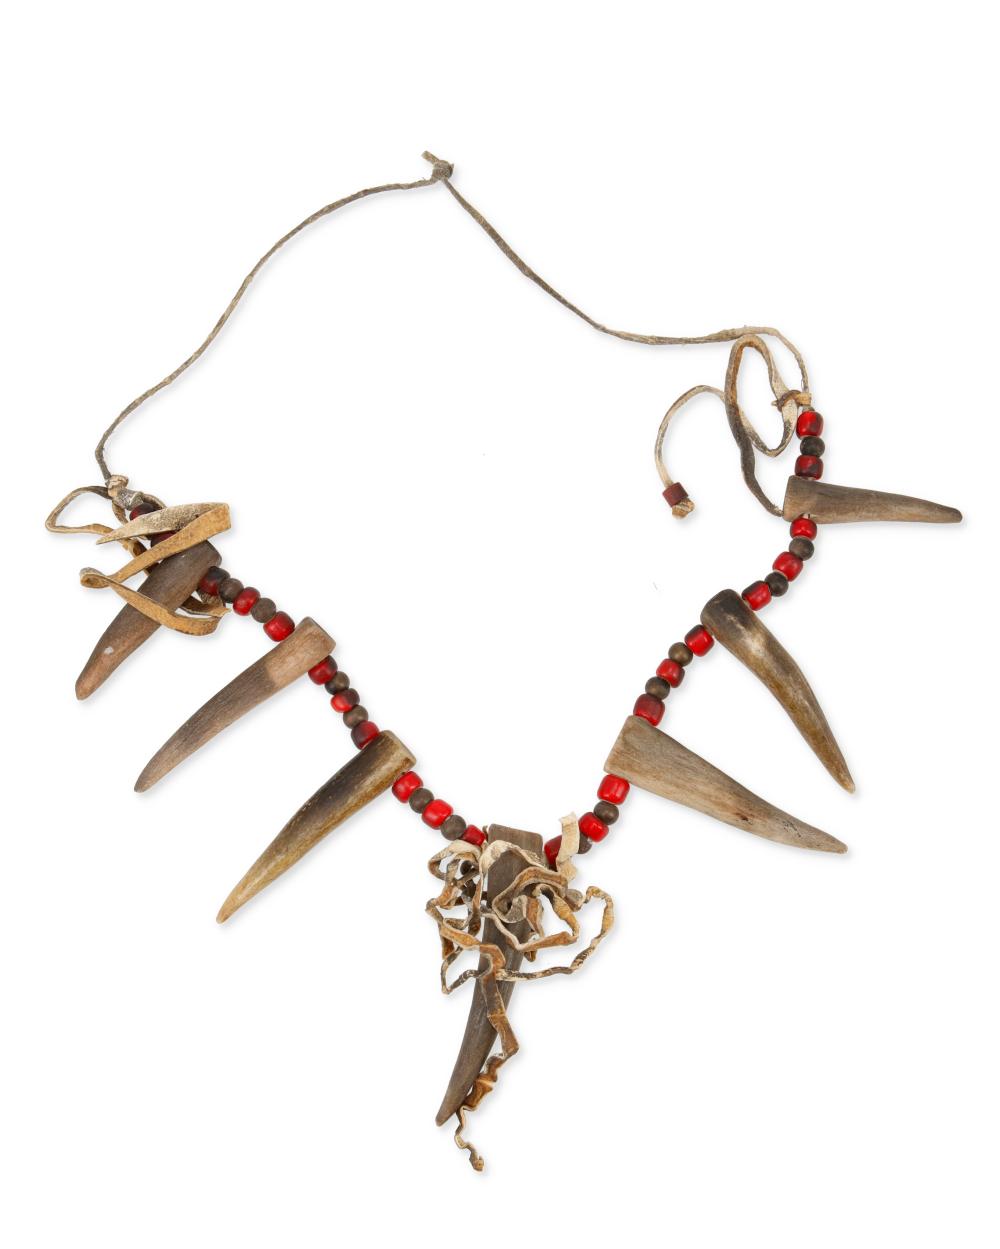 A NATIVE AMERICAN ANTLER NECKLACEA 3b2f4d